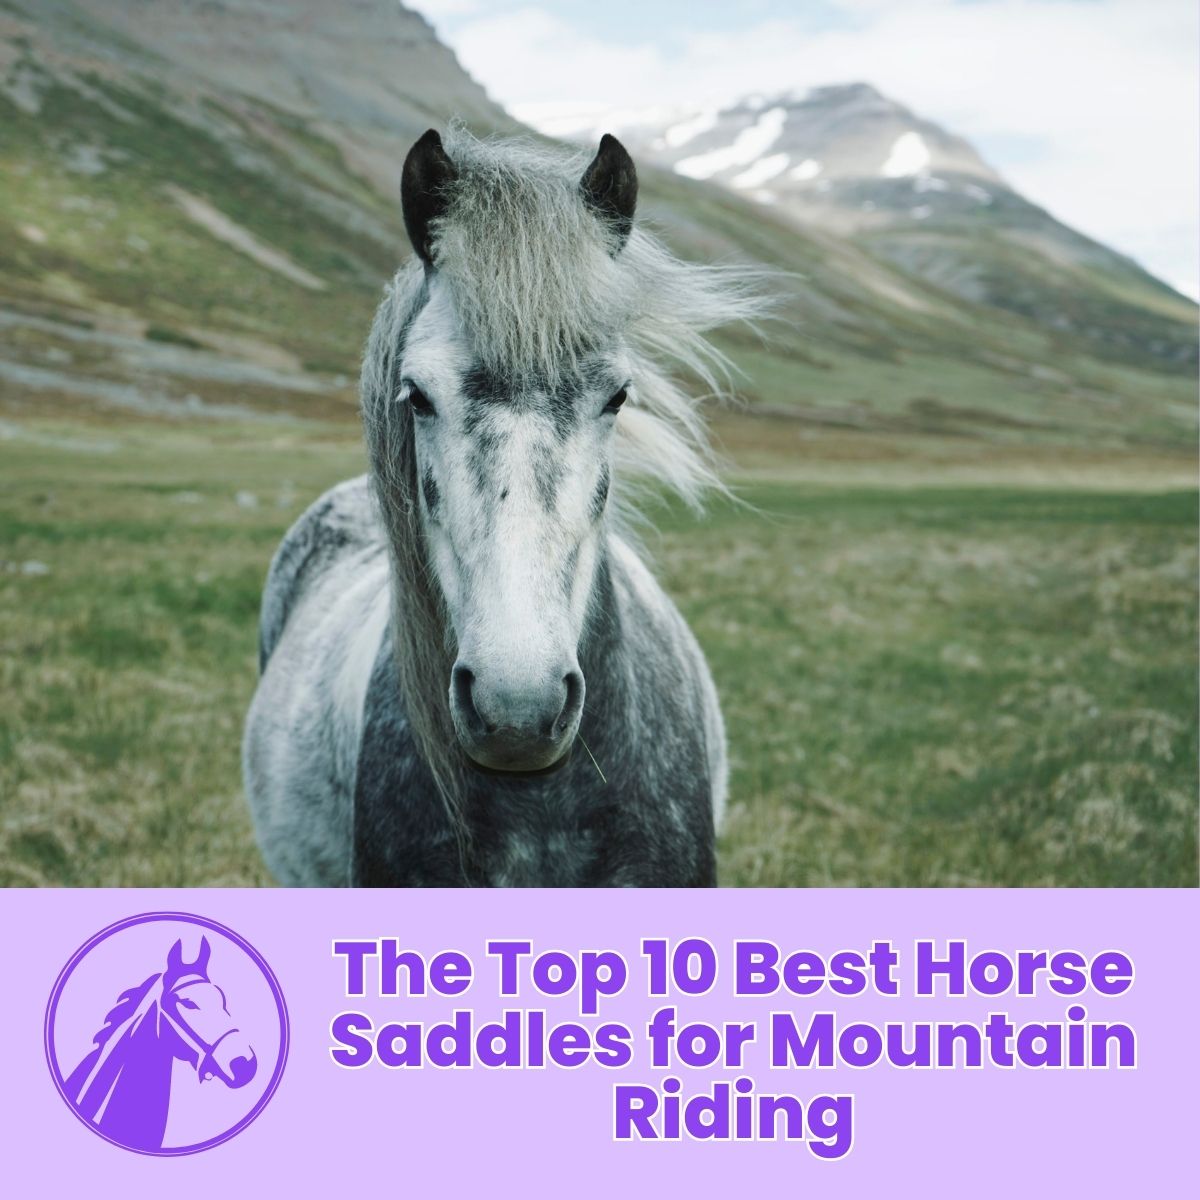 You are currently viewing The Top 10 Best Horse Saddles for Mountain Riding